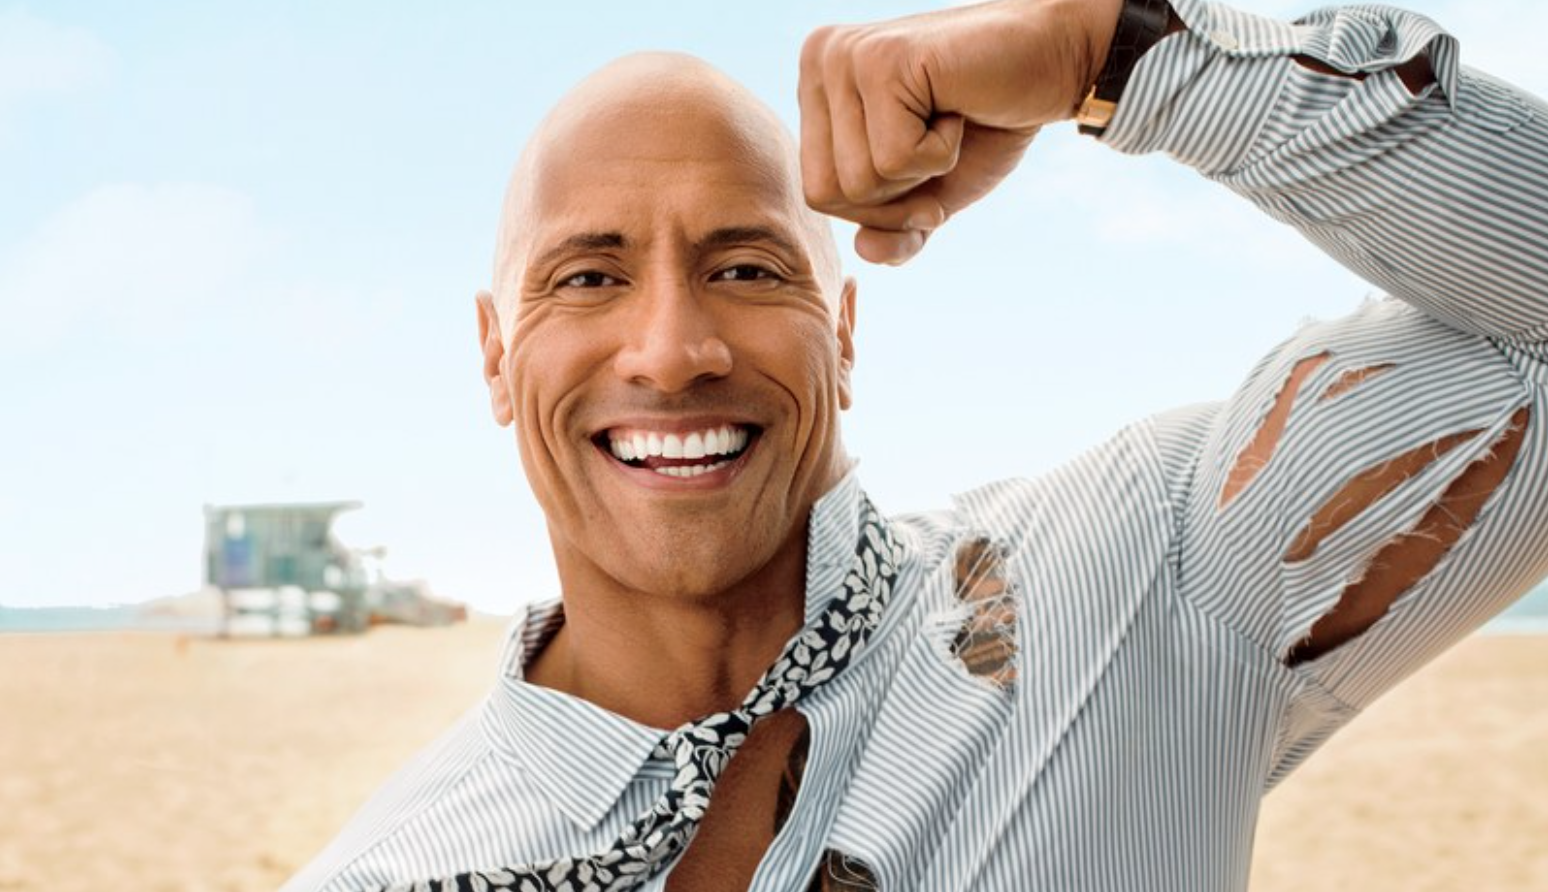 Dwayne ‘The Rock’ Johnson On XFL’s Reported $60 Million Loss